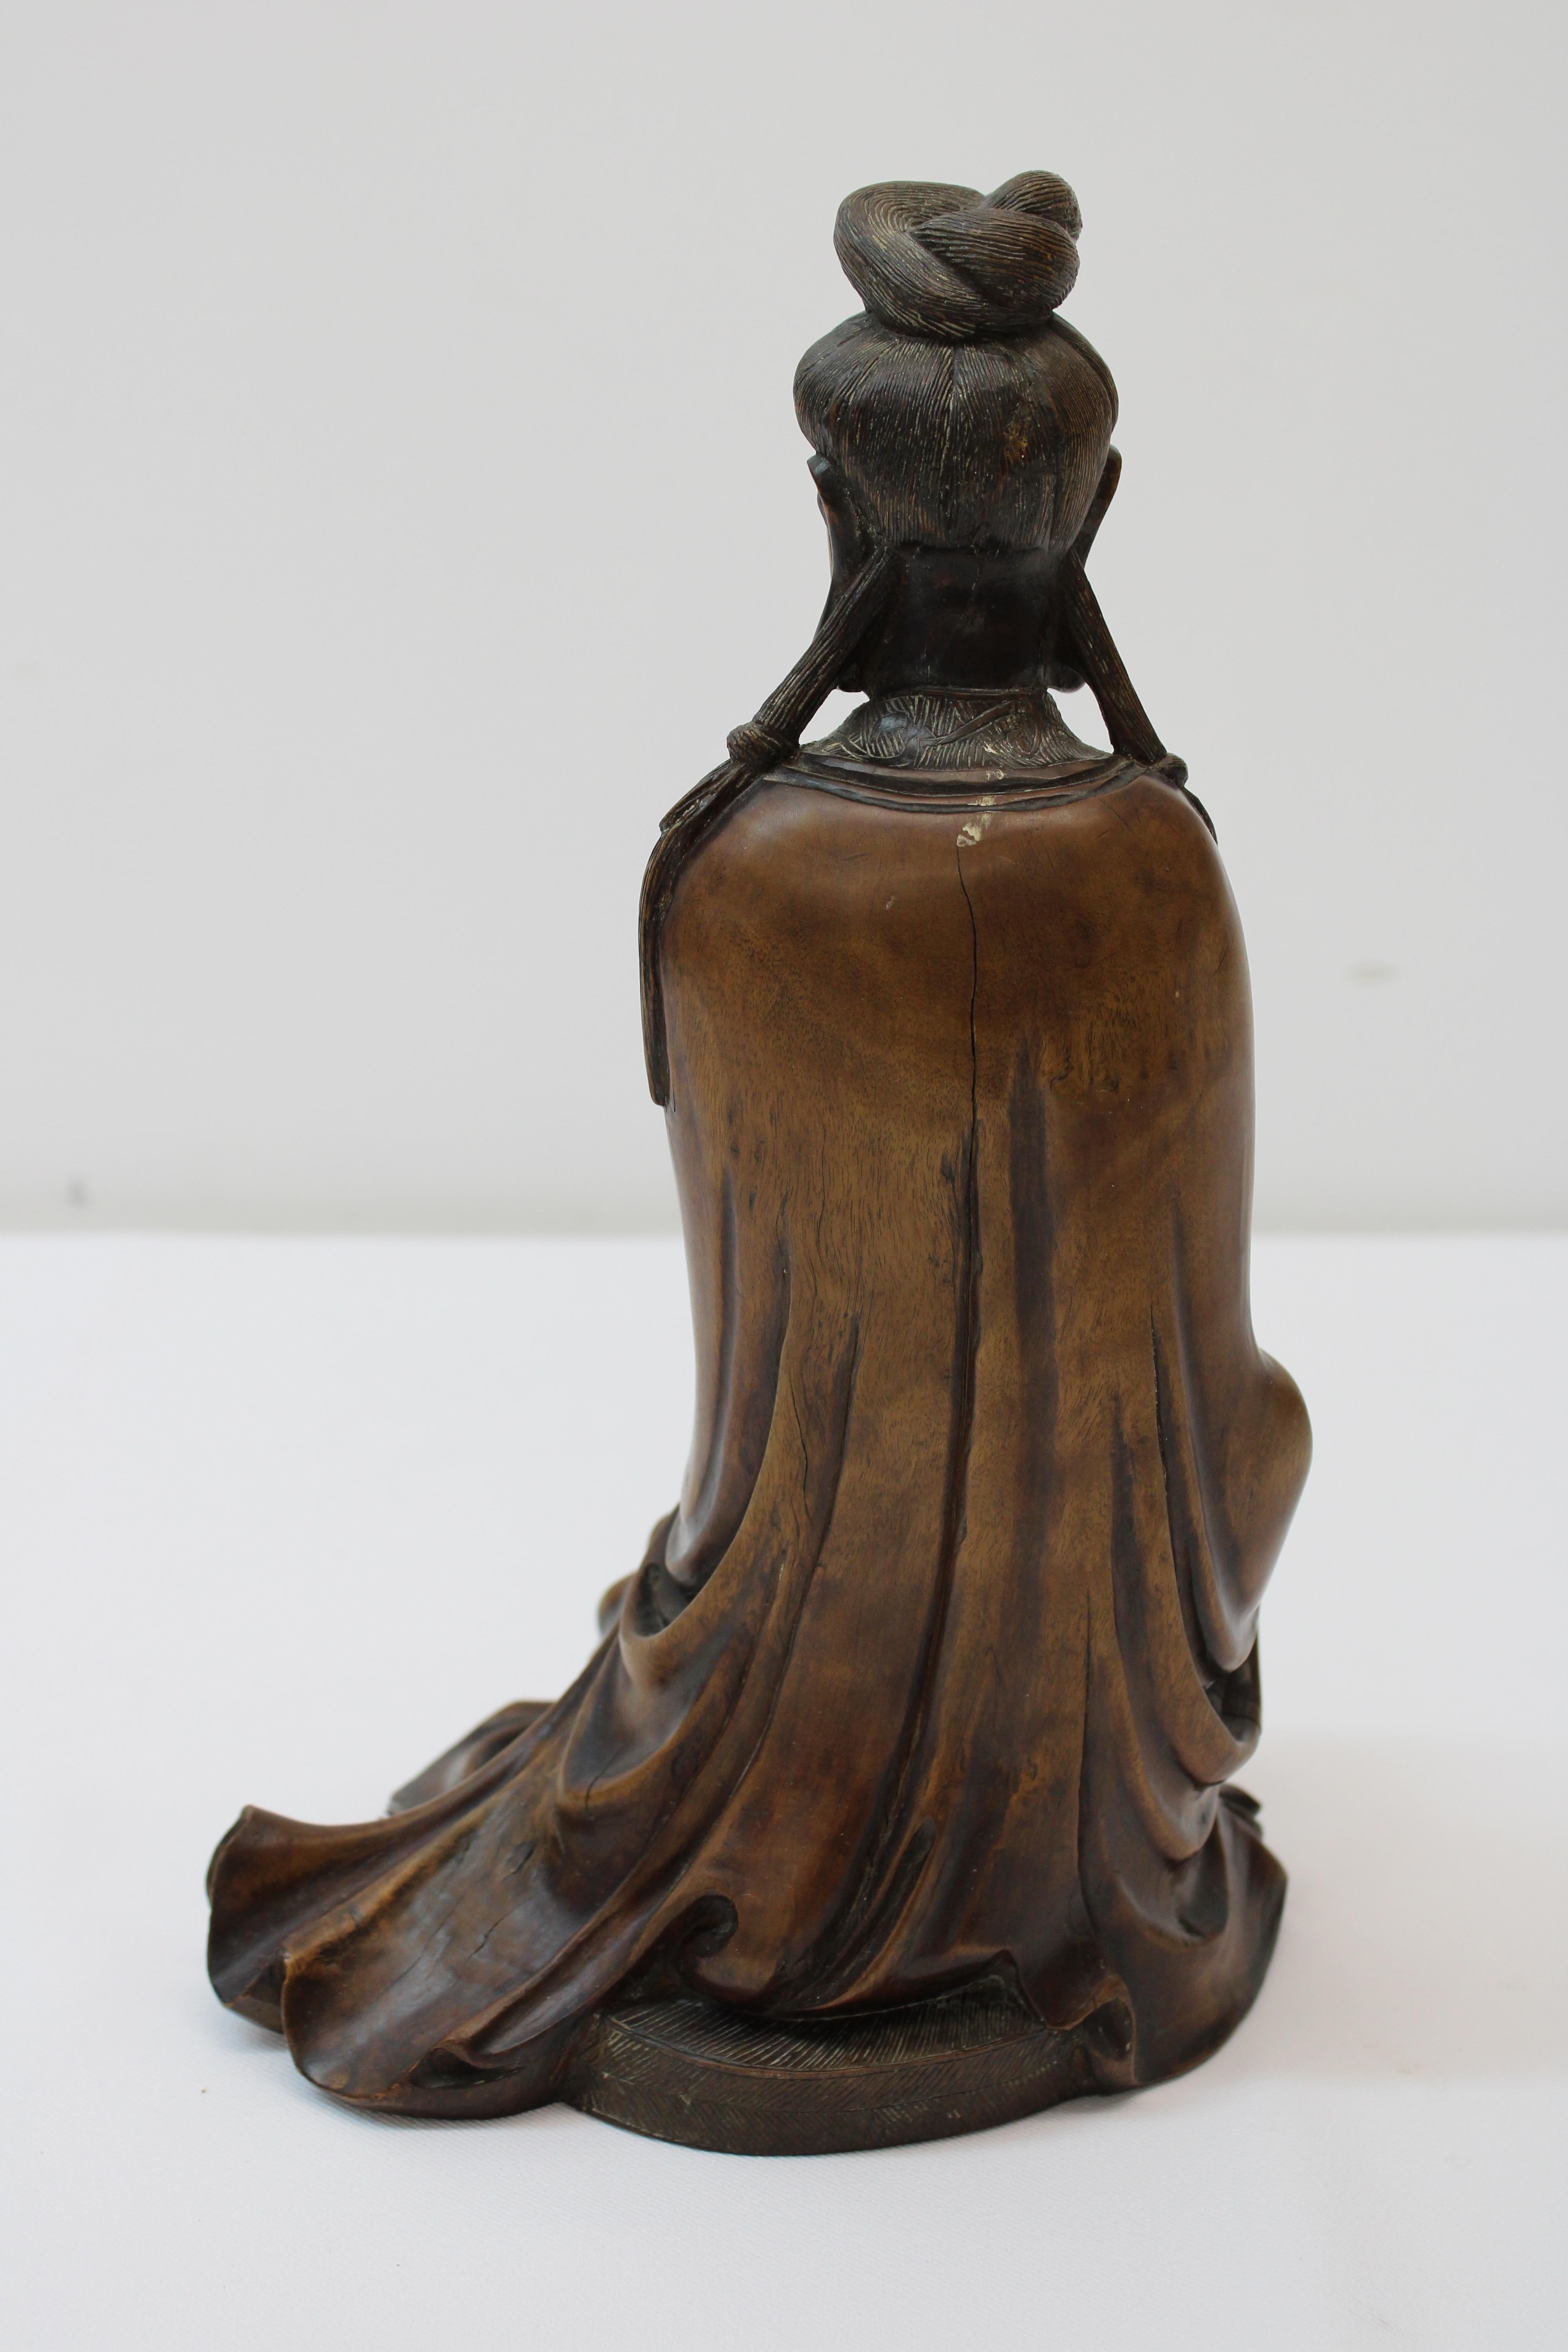 Kuan Yin Goddess Statue In Good Condition For Sale In San Francisco, CA